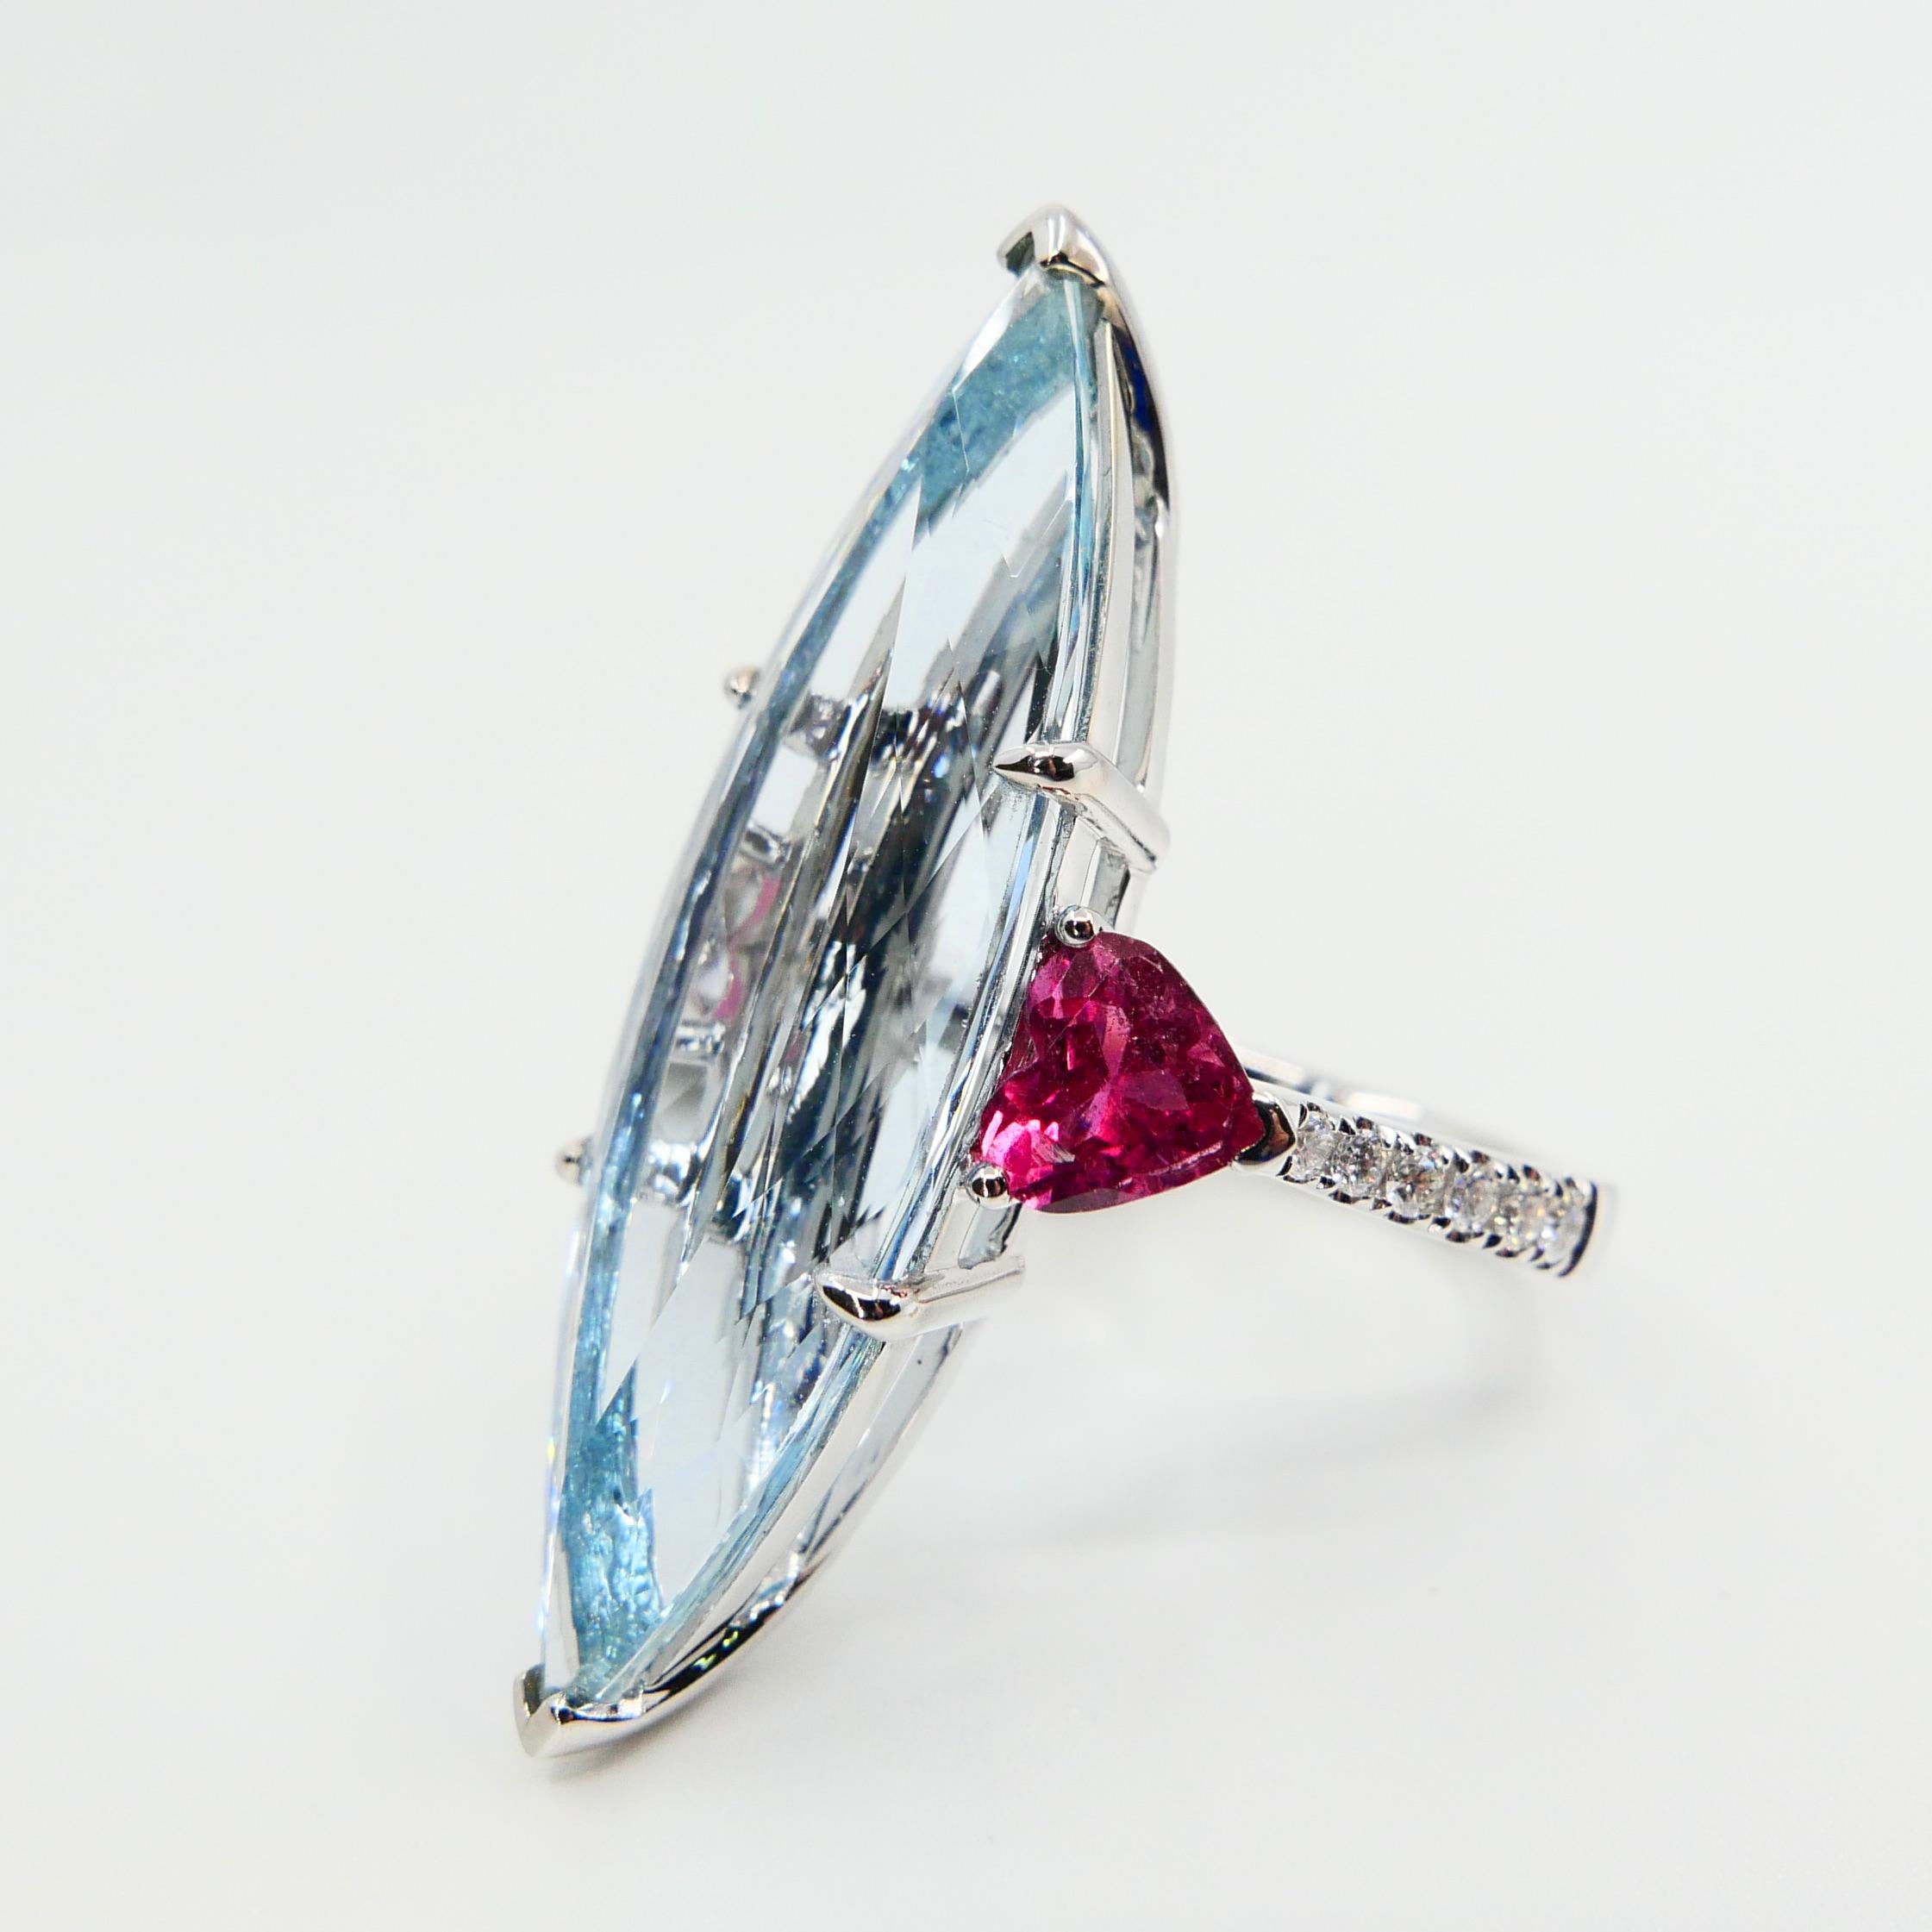 Certified 16Cts Aquamarine, Heart Shaped Pink Tourmaline & Diamond Cocktail Ring For Sale 2